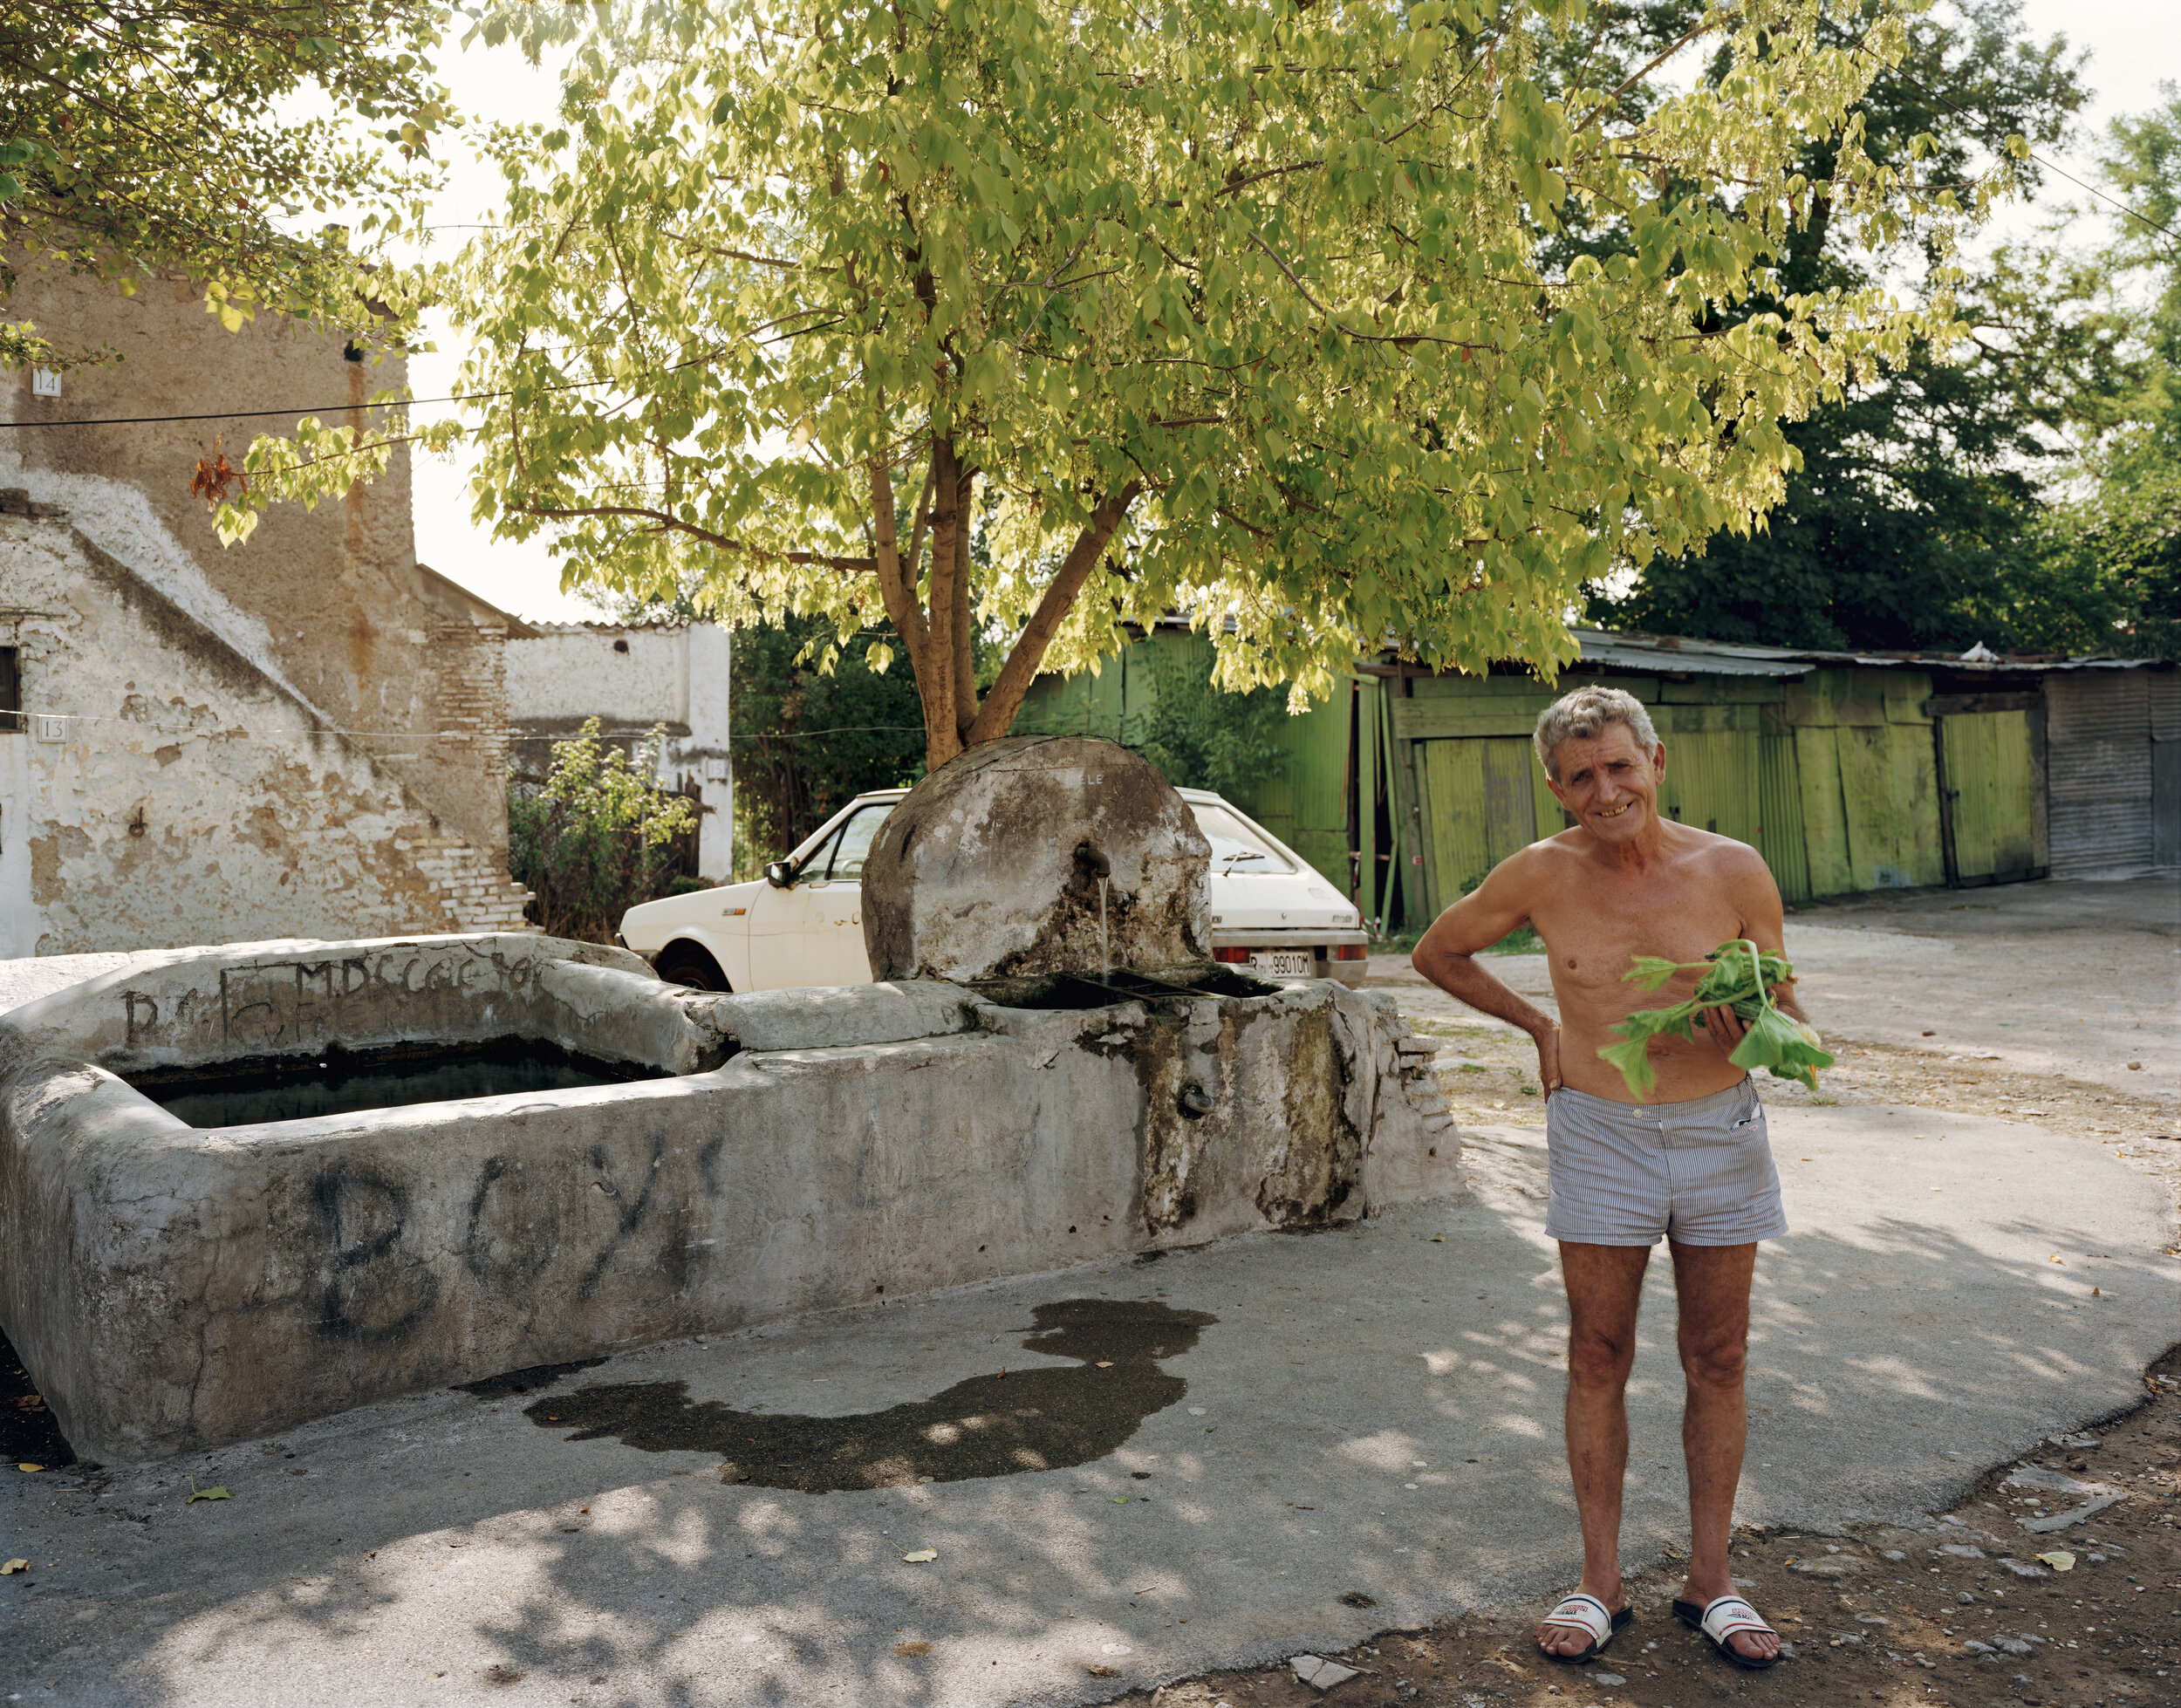 A man who has just washed kohlrabo in a fountain, Roma, vecchia, August 1990